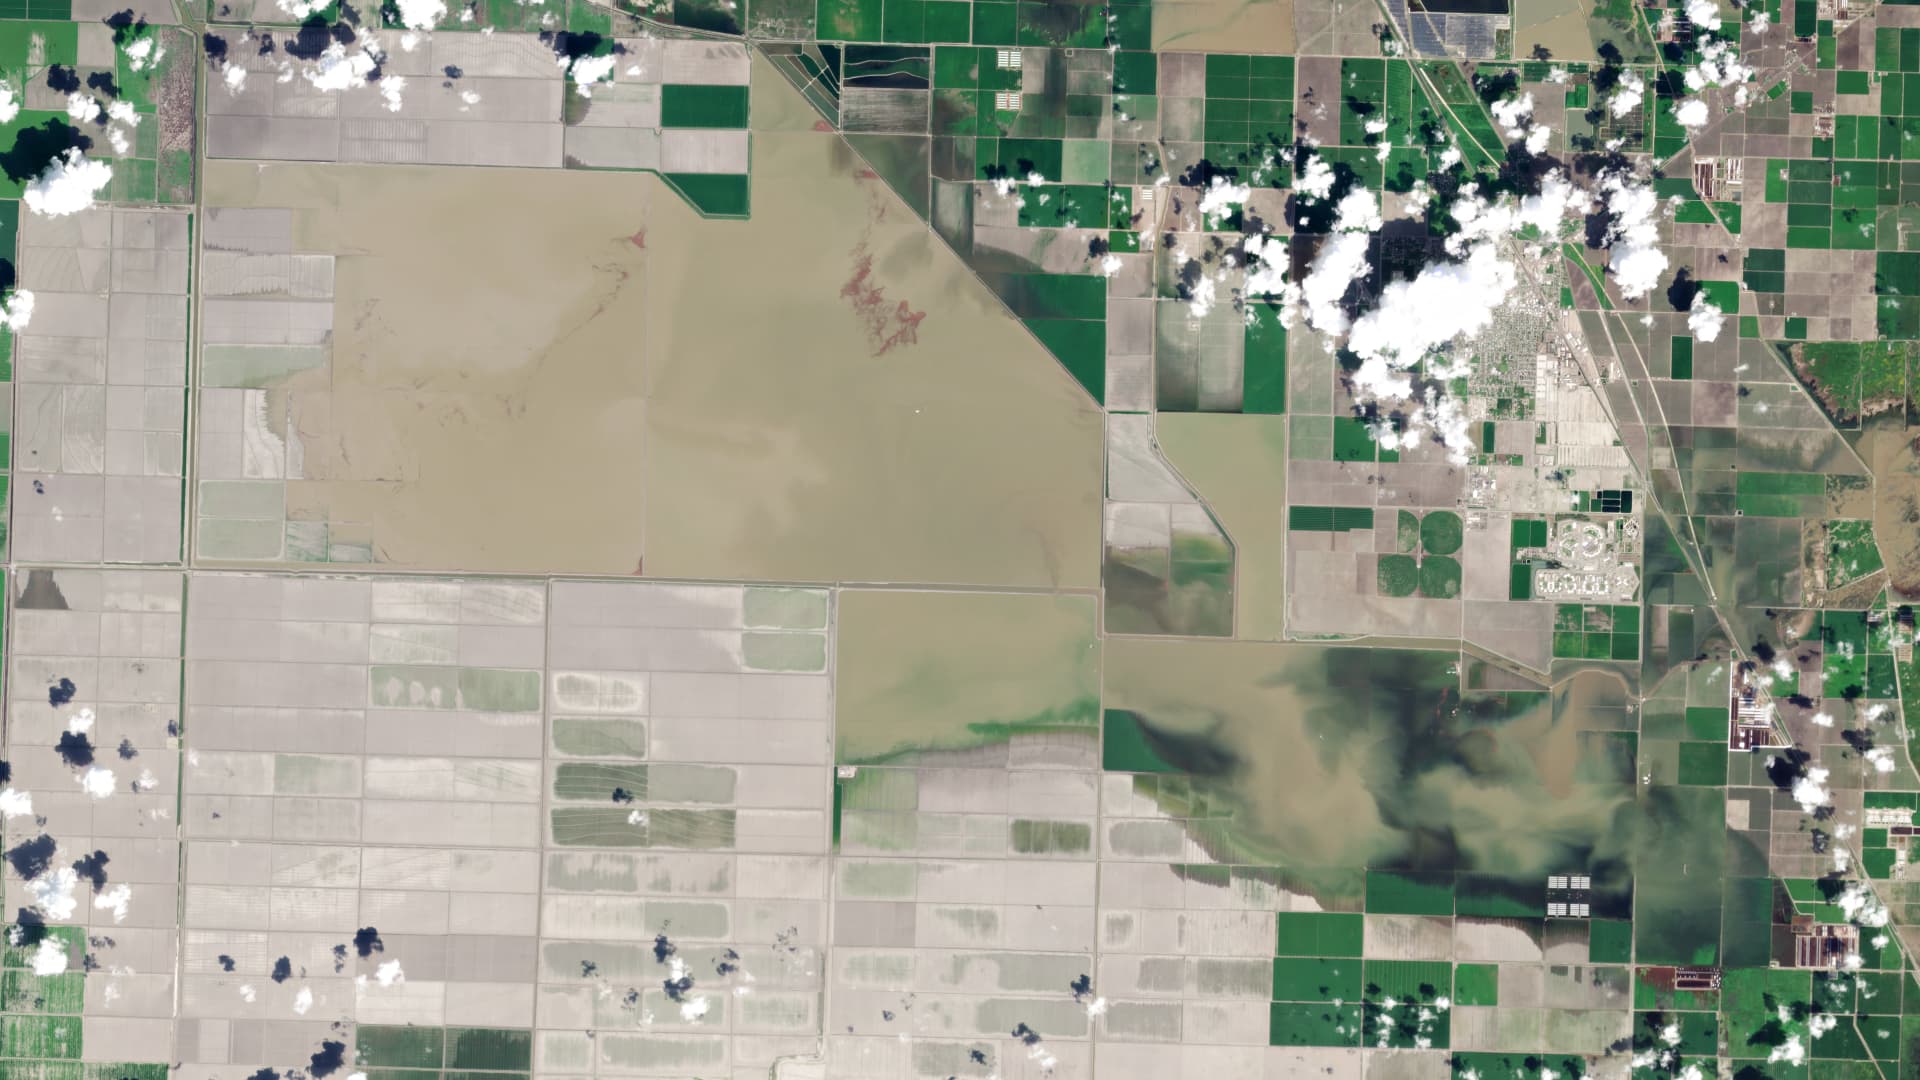 Satellite images show miles of flooding after California's Tulare Lake returns.